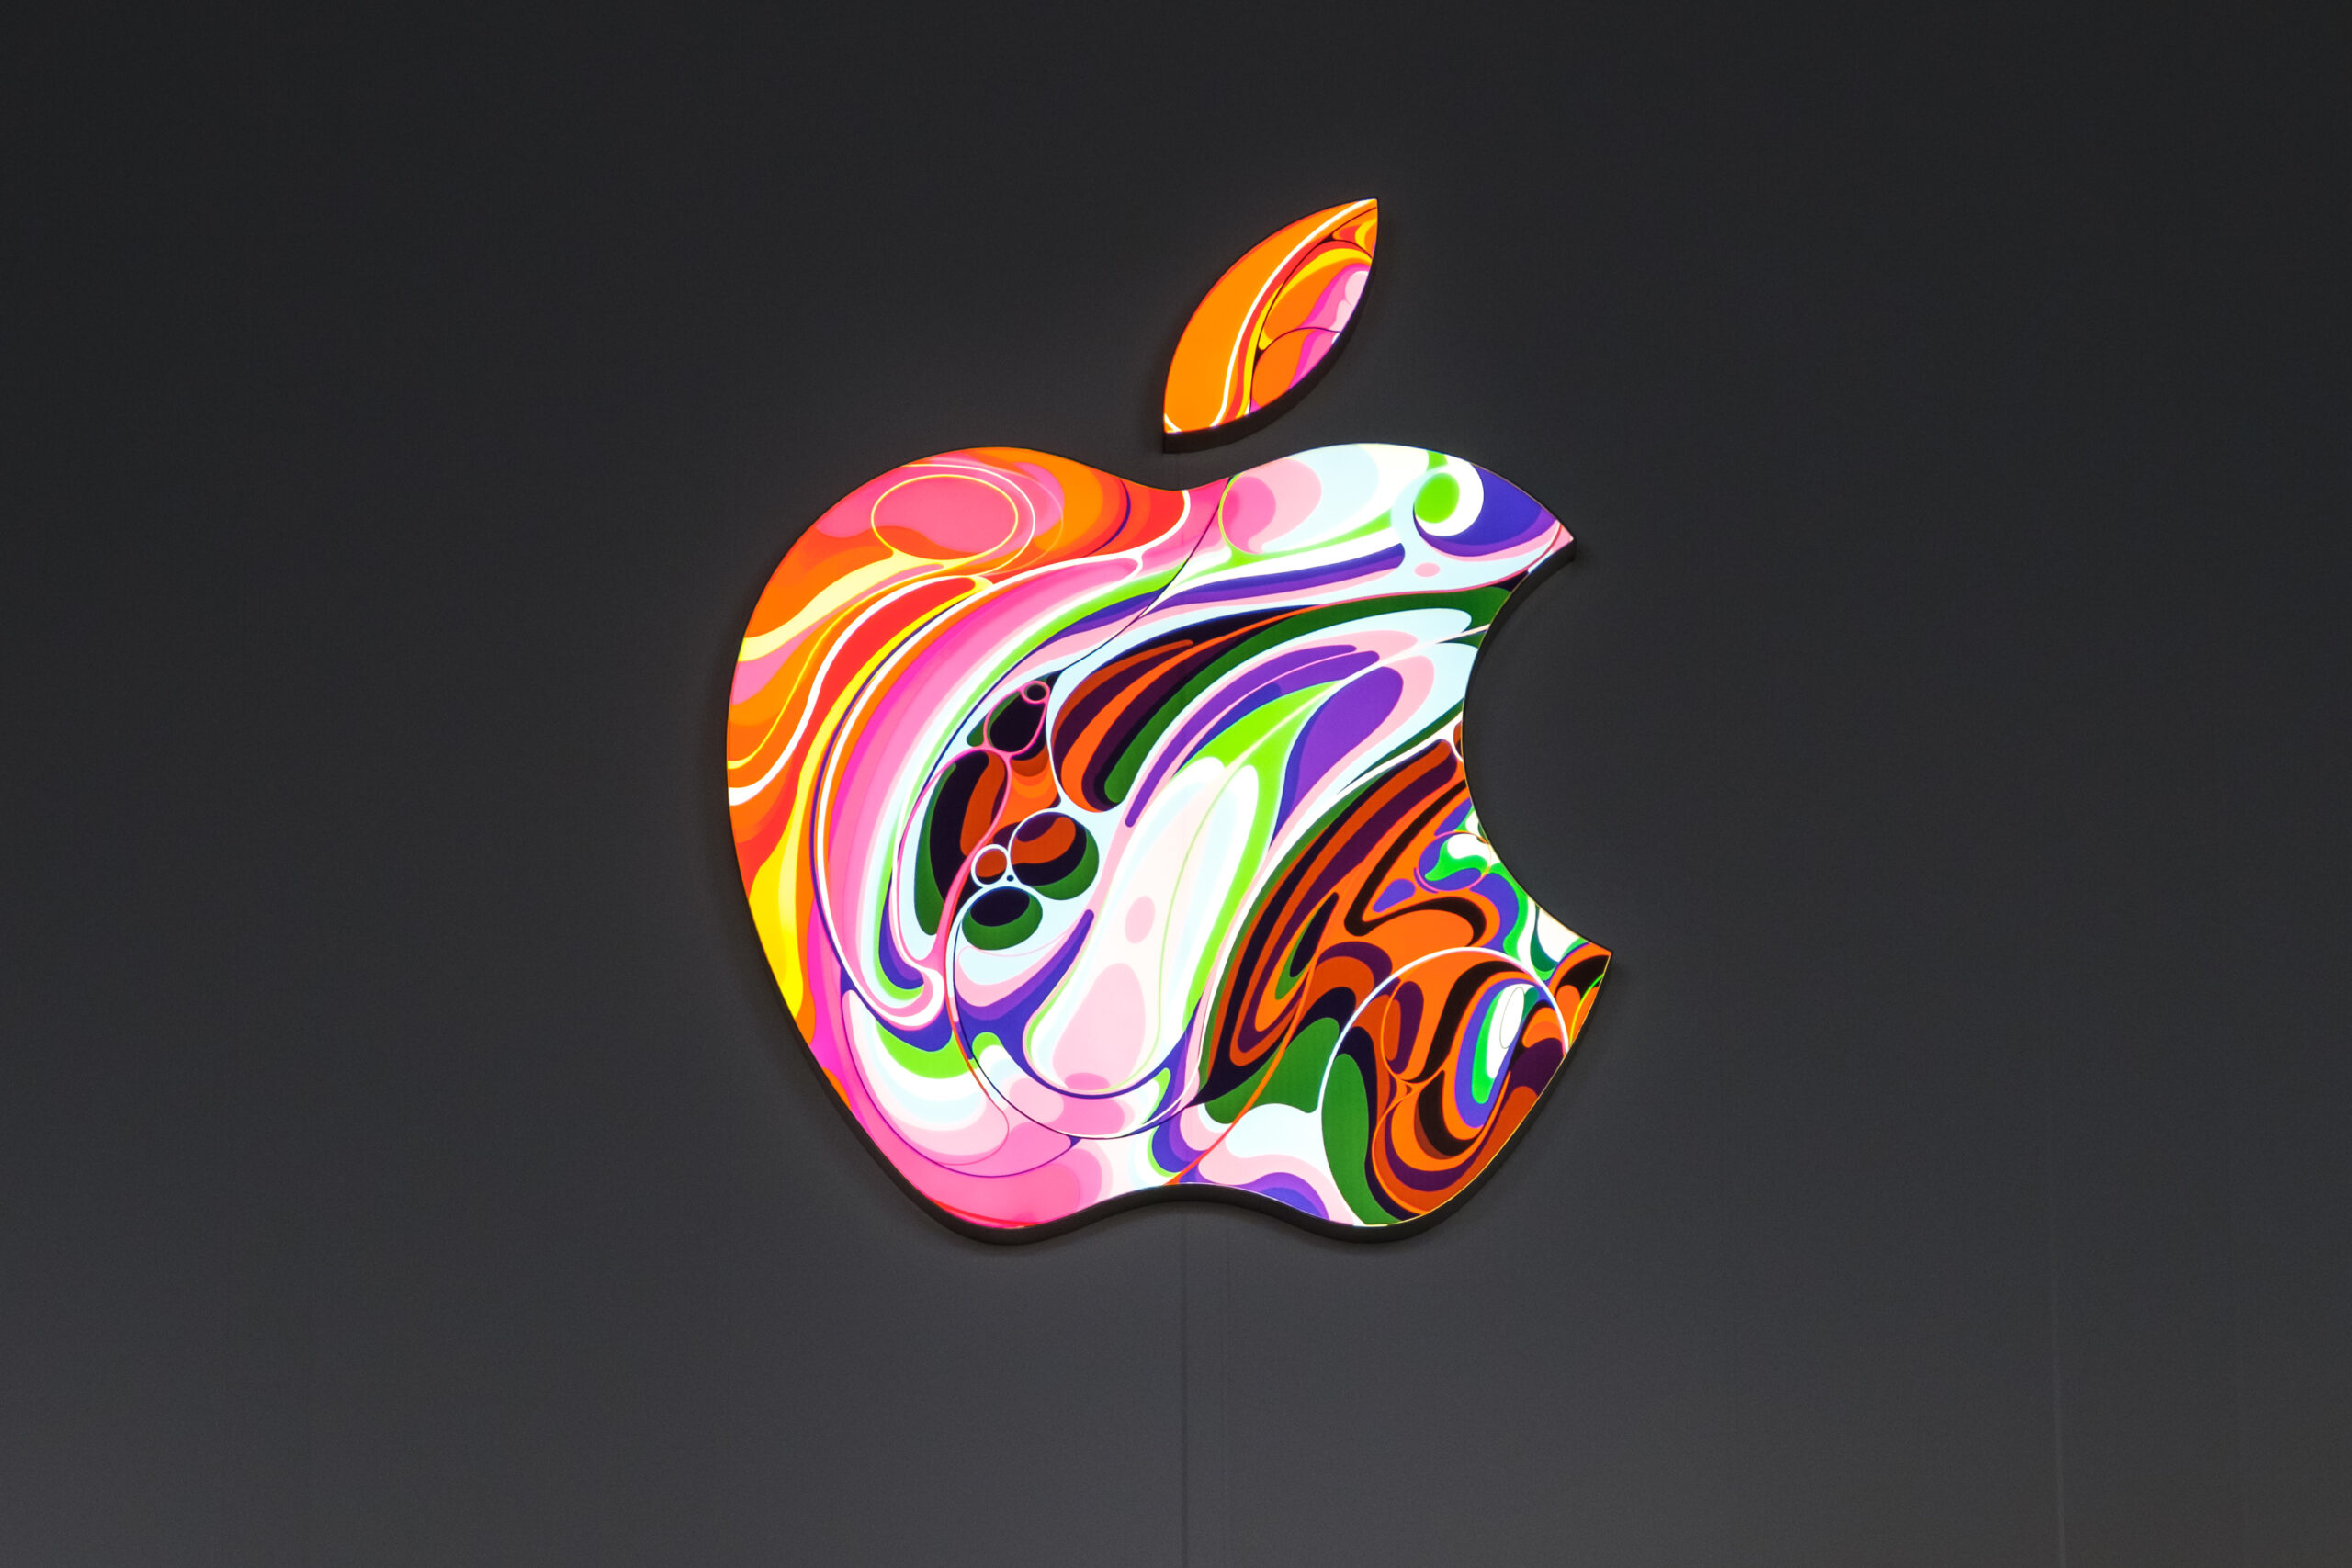 Colorful Apple logo while making creative updates on apple store